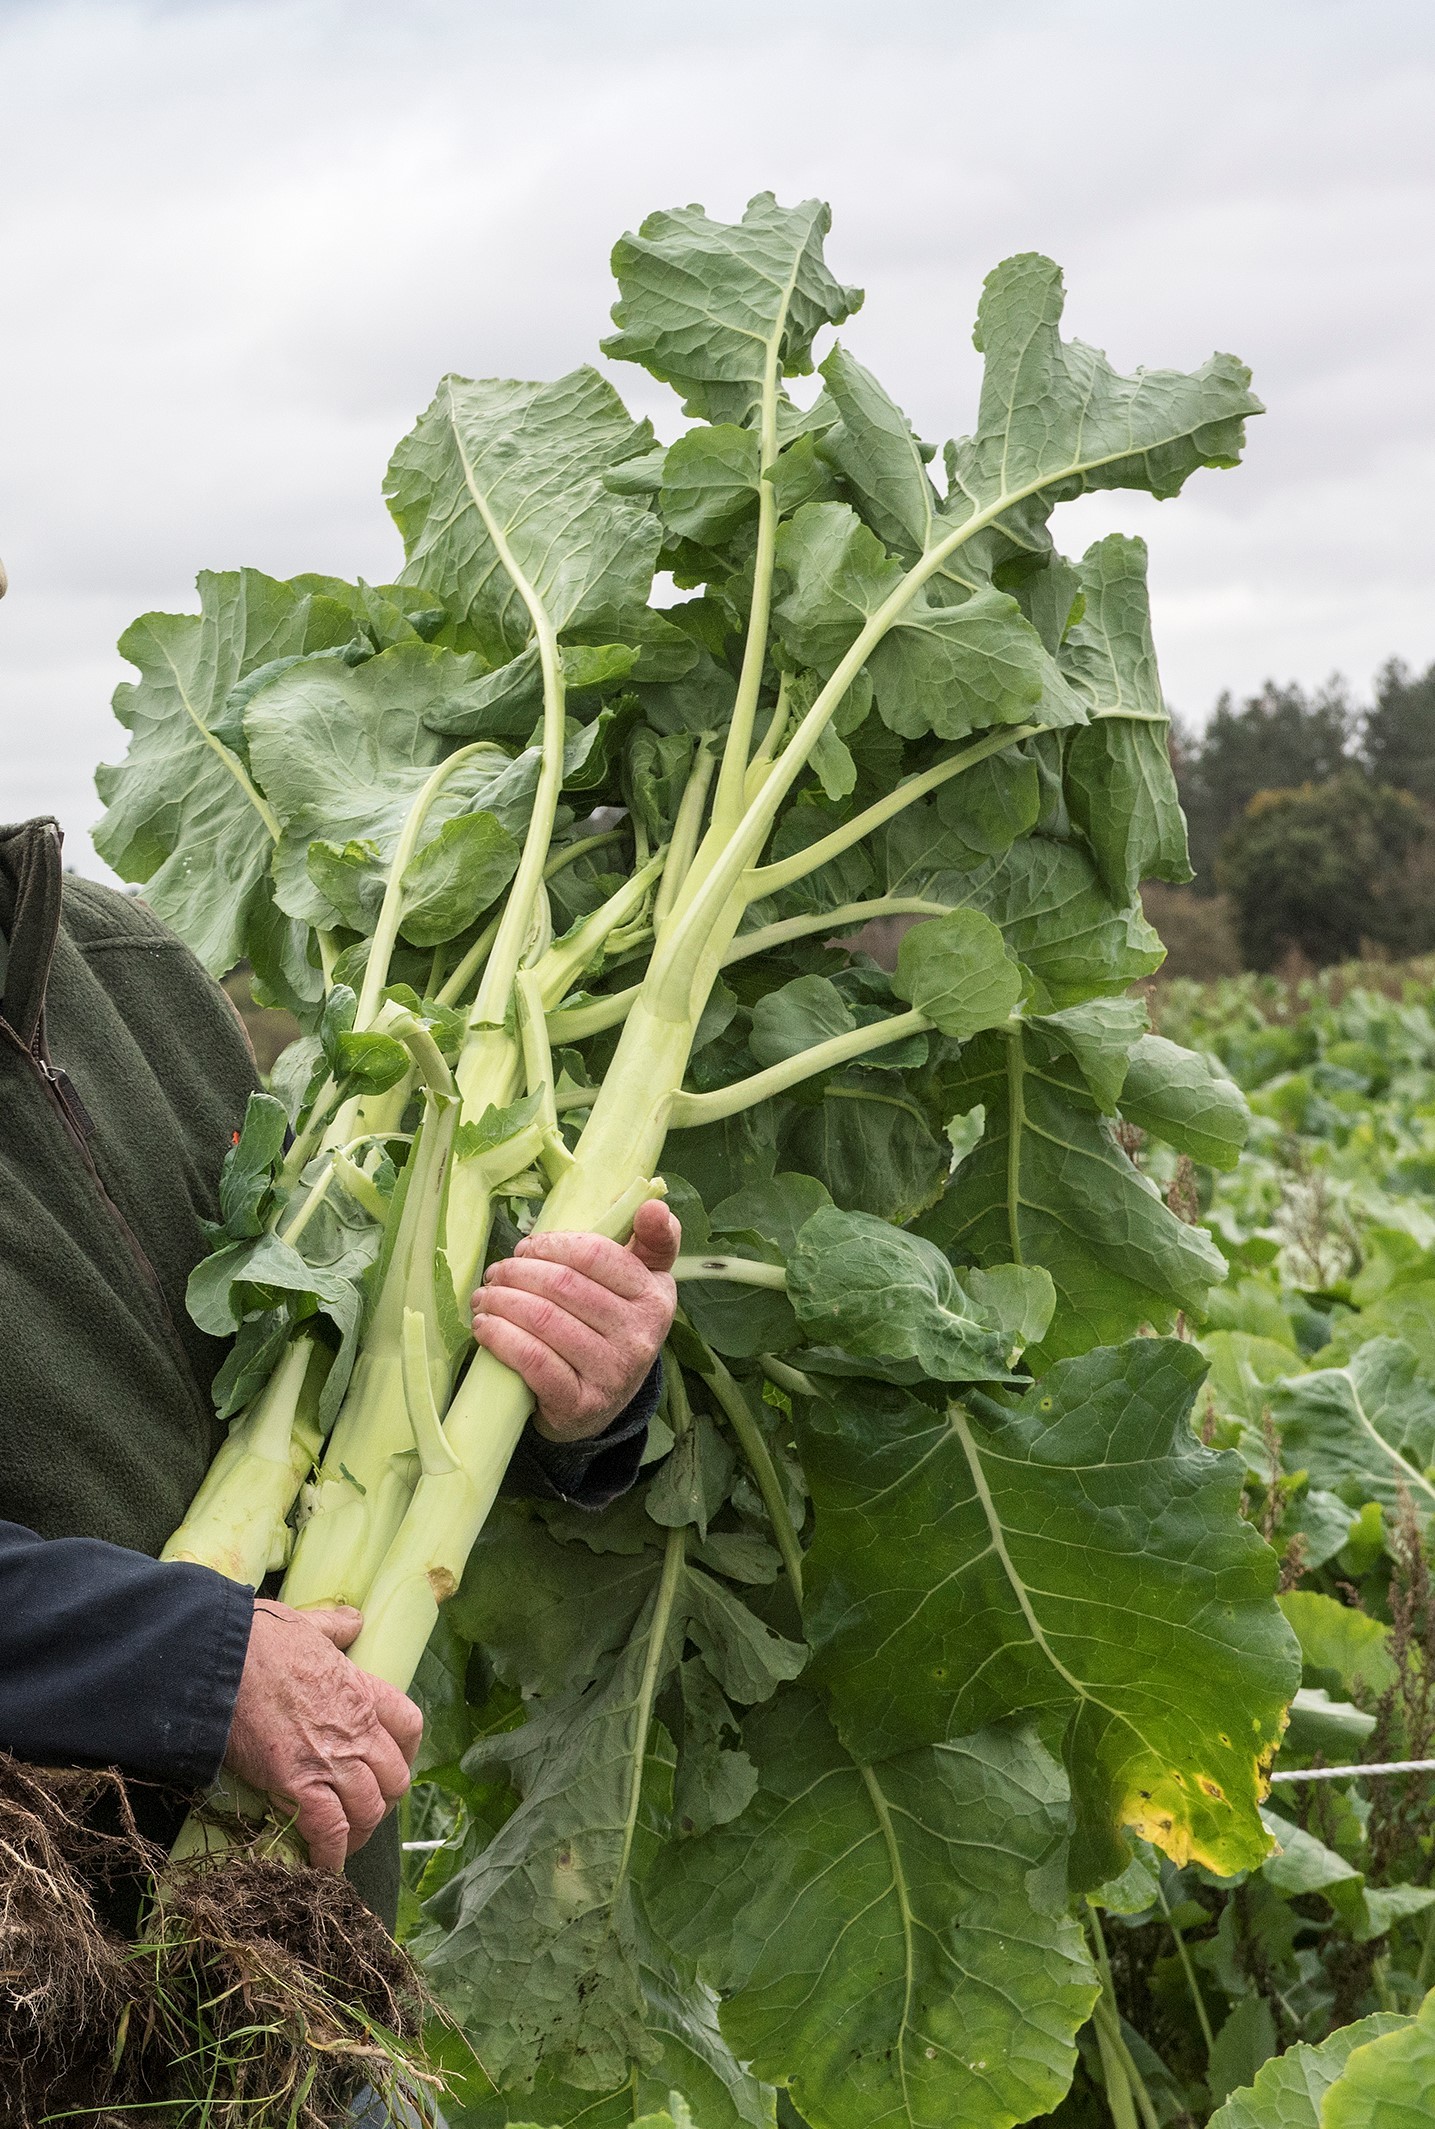 Bombardier kale: softer, more digestible stems improve the ME, feed value and utilisation of kale